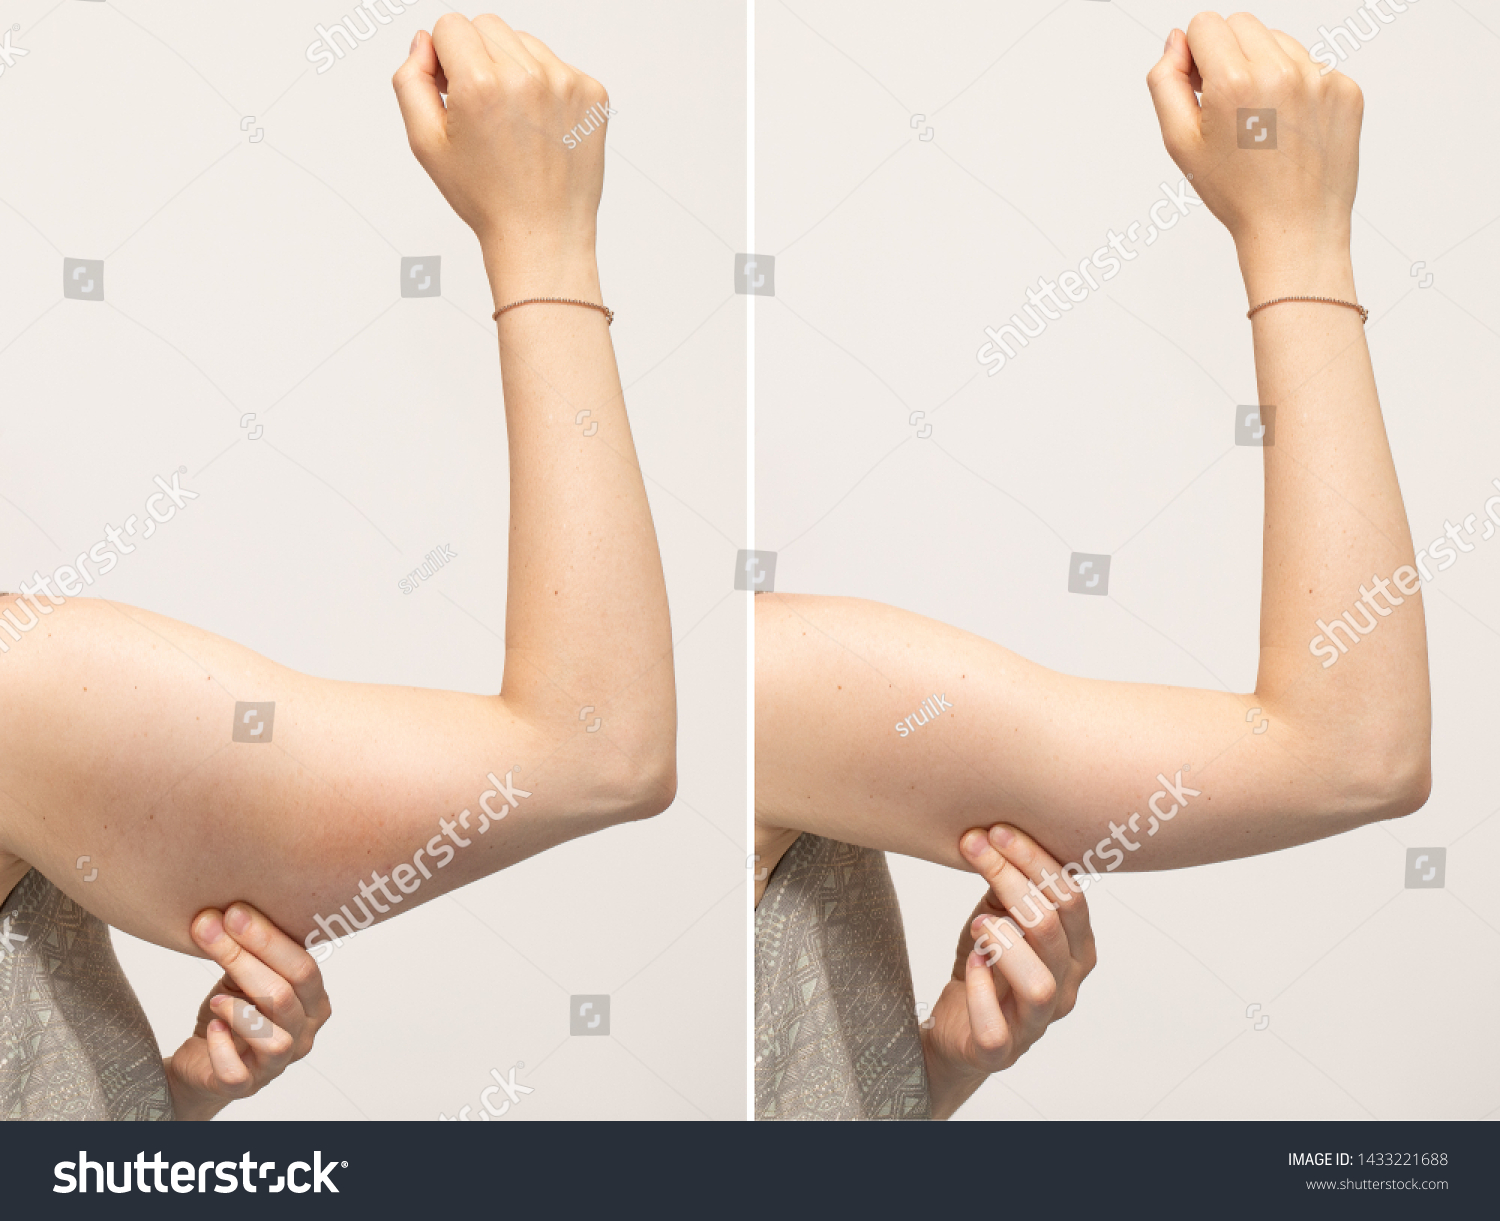 A split screen of a woman pinching the skin beneath her arm. Showing the before and after results of brachioplasty surgery, also called an arm lift. #1433221688